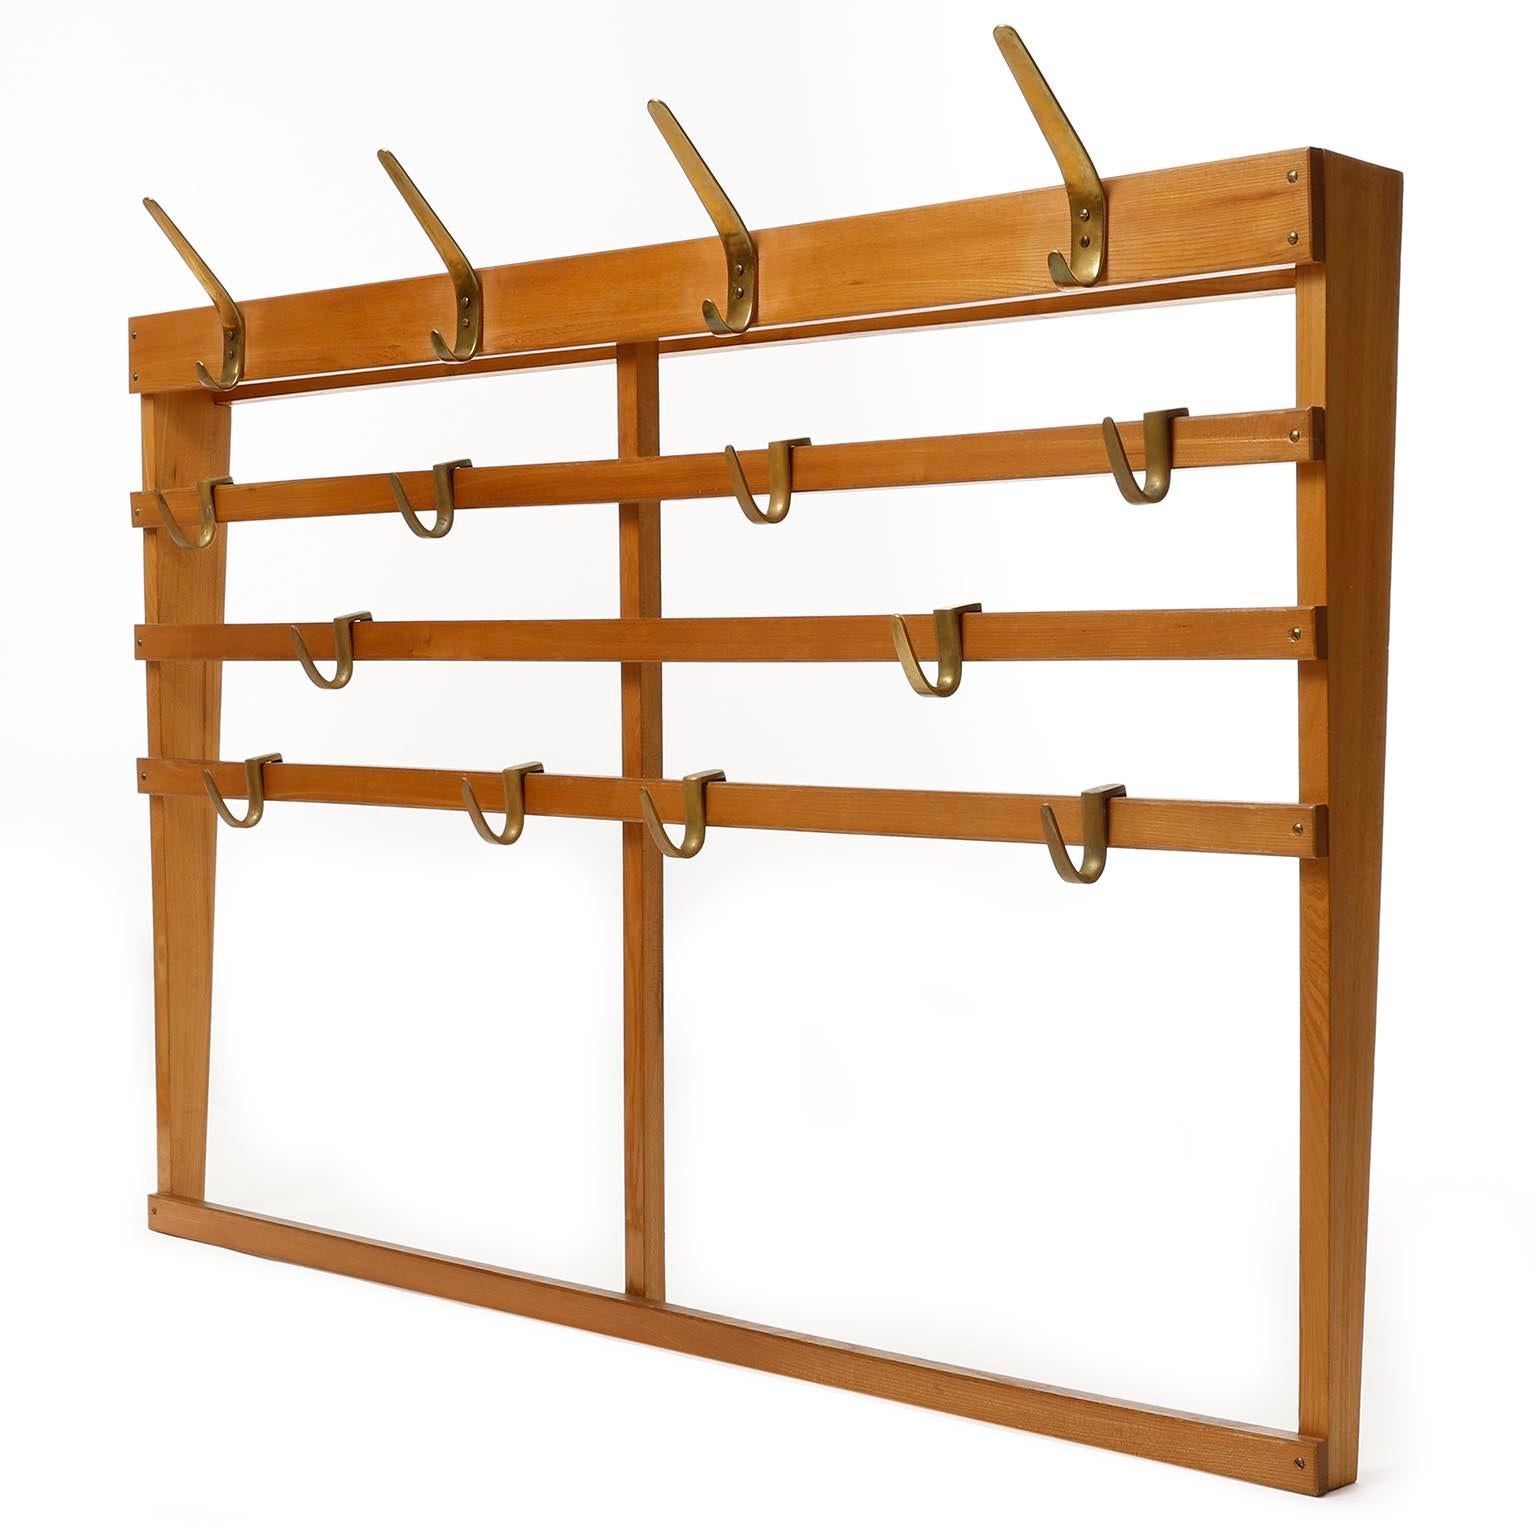 A large wooden coat check with patinated brass hooks manufactured in midcentury, circa 1950.
It consists of a frame made of wood and six polished solid brass hooks with lovely patina.
Five horizontal slats are mounted with patinated brass screws